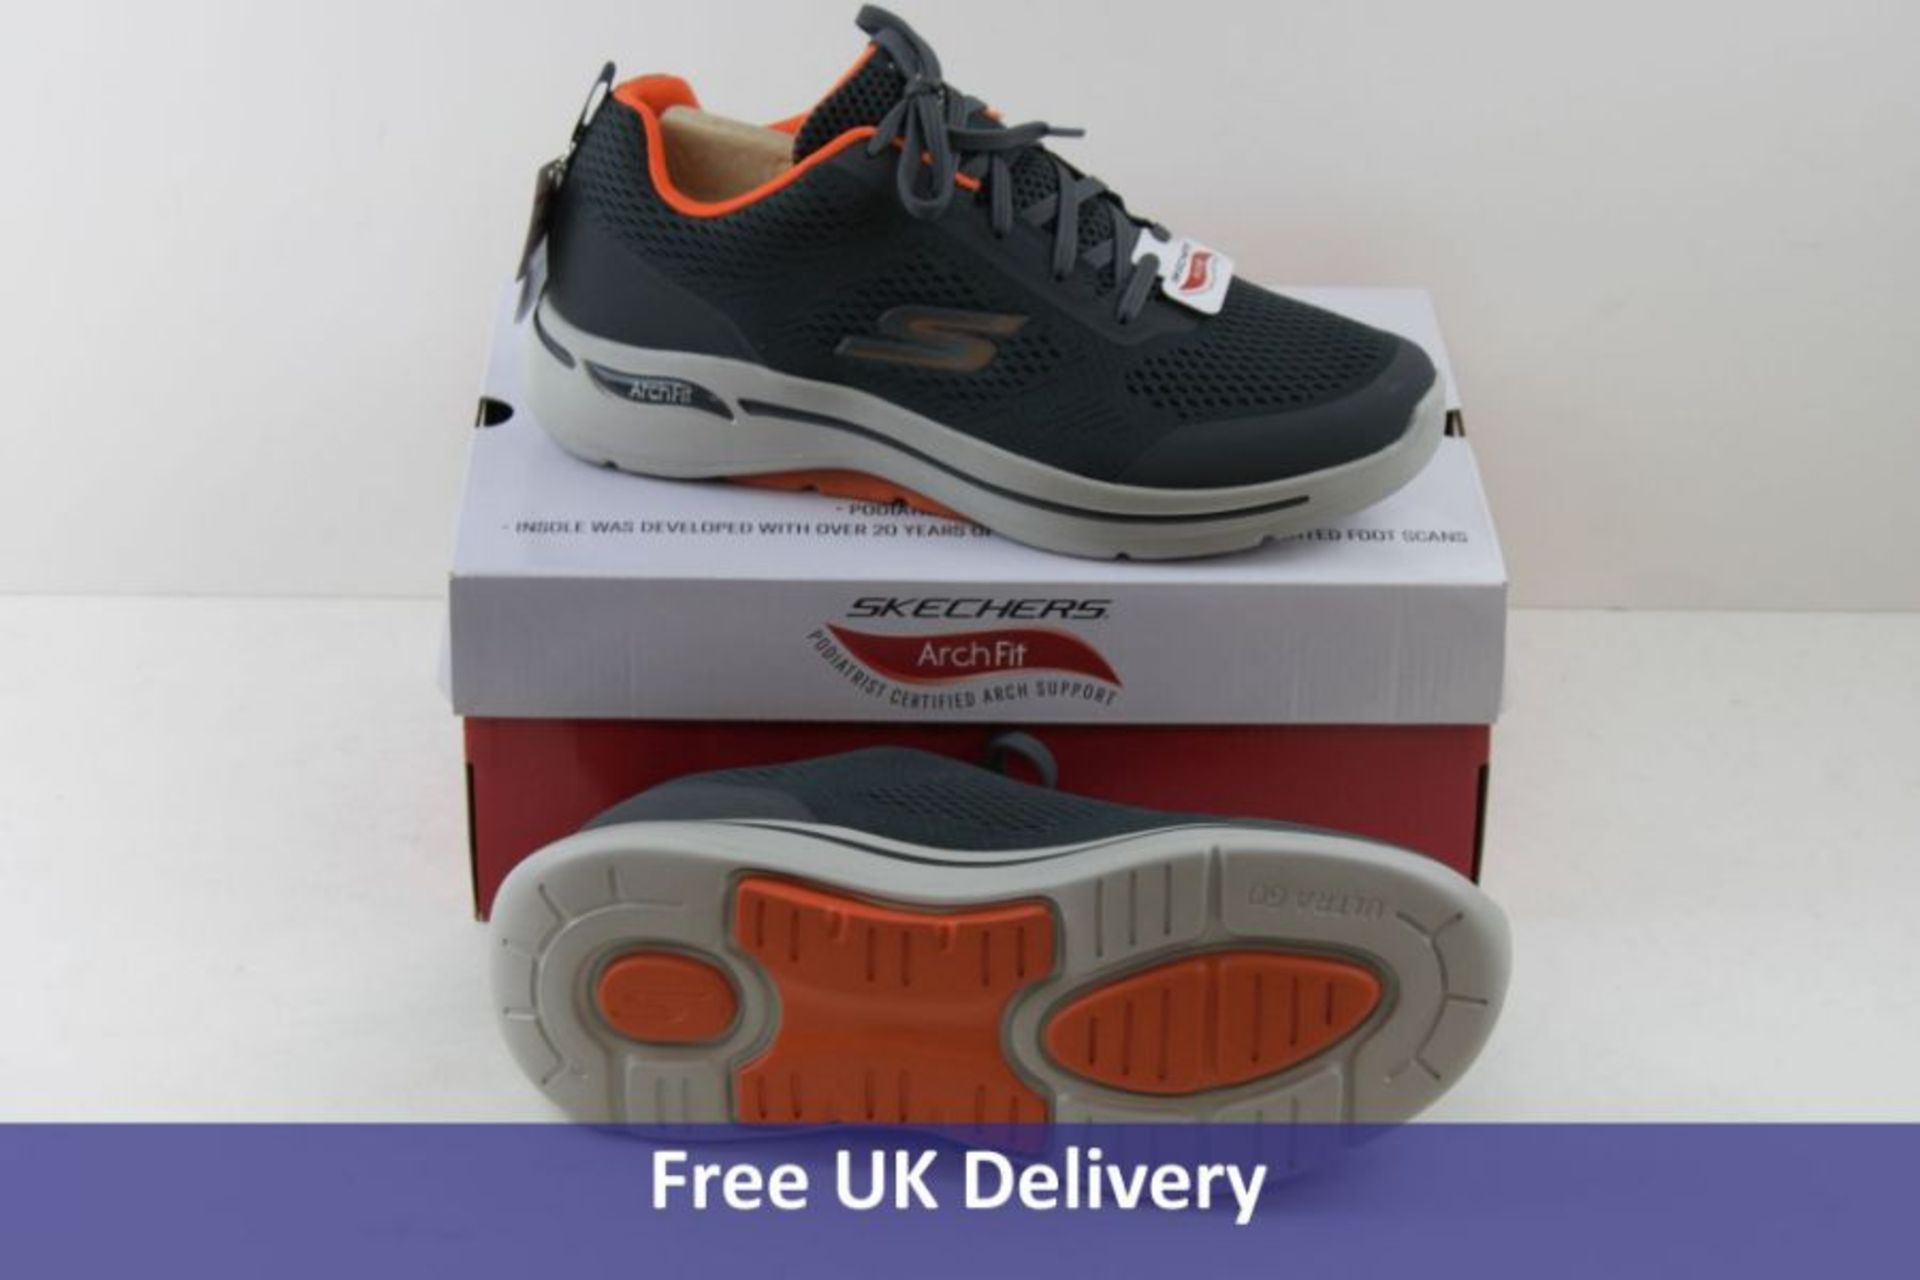 Skechers Men's Go Walk Arch Fit Trainers, Charcoal and Orange, UK 10.5